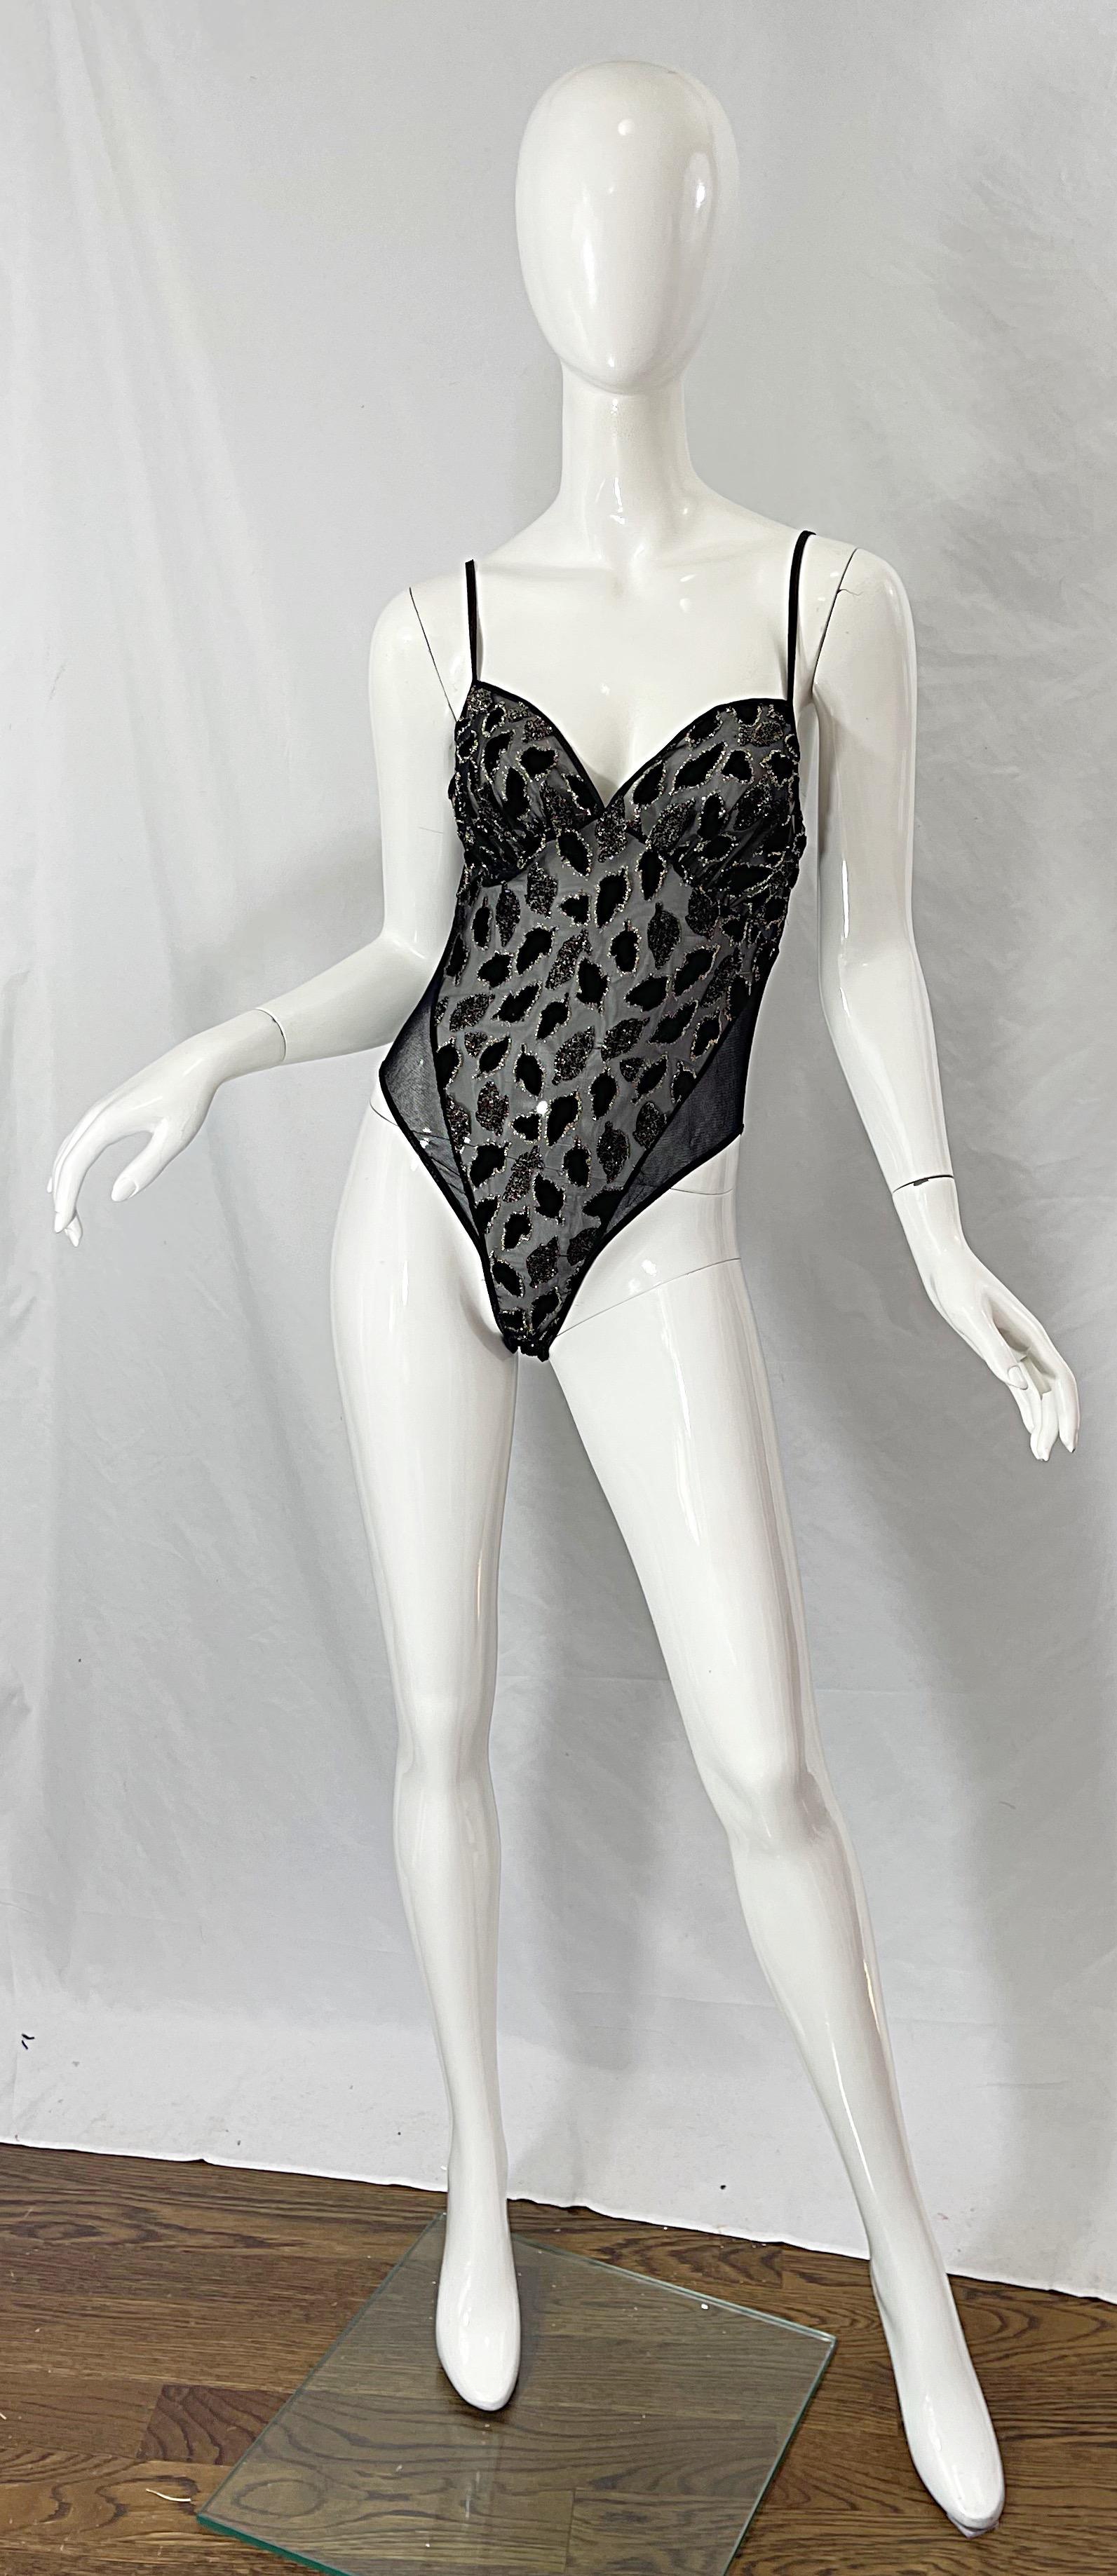 Sexy early 80s BOB MACKIE black and gold leaf motif mesh and cut-out burnt velvet one piece sheer bodysuit ! I love the variety of fabrics on this rare gem. Can easily be dressed up or down. Pair with shorts, jeans, trousers or a skirt.
In great